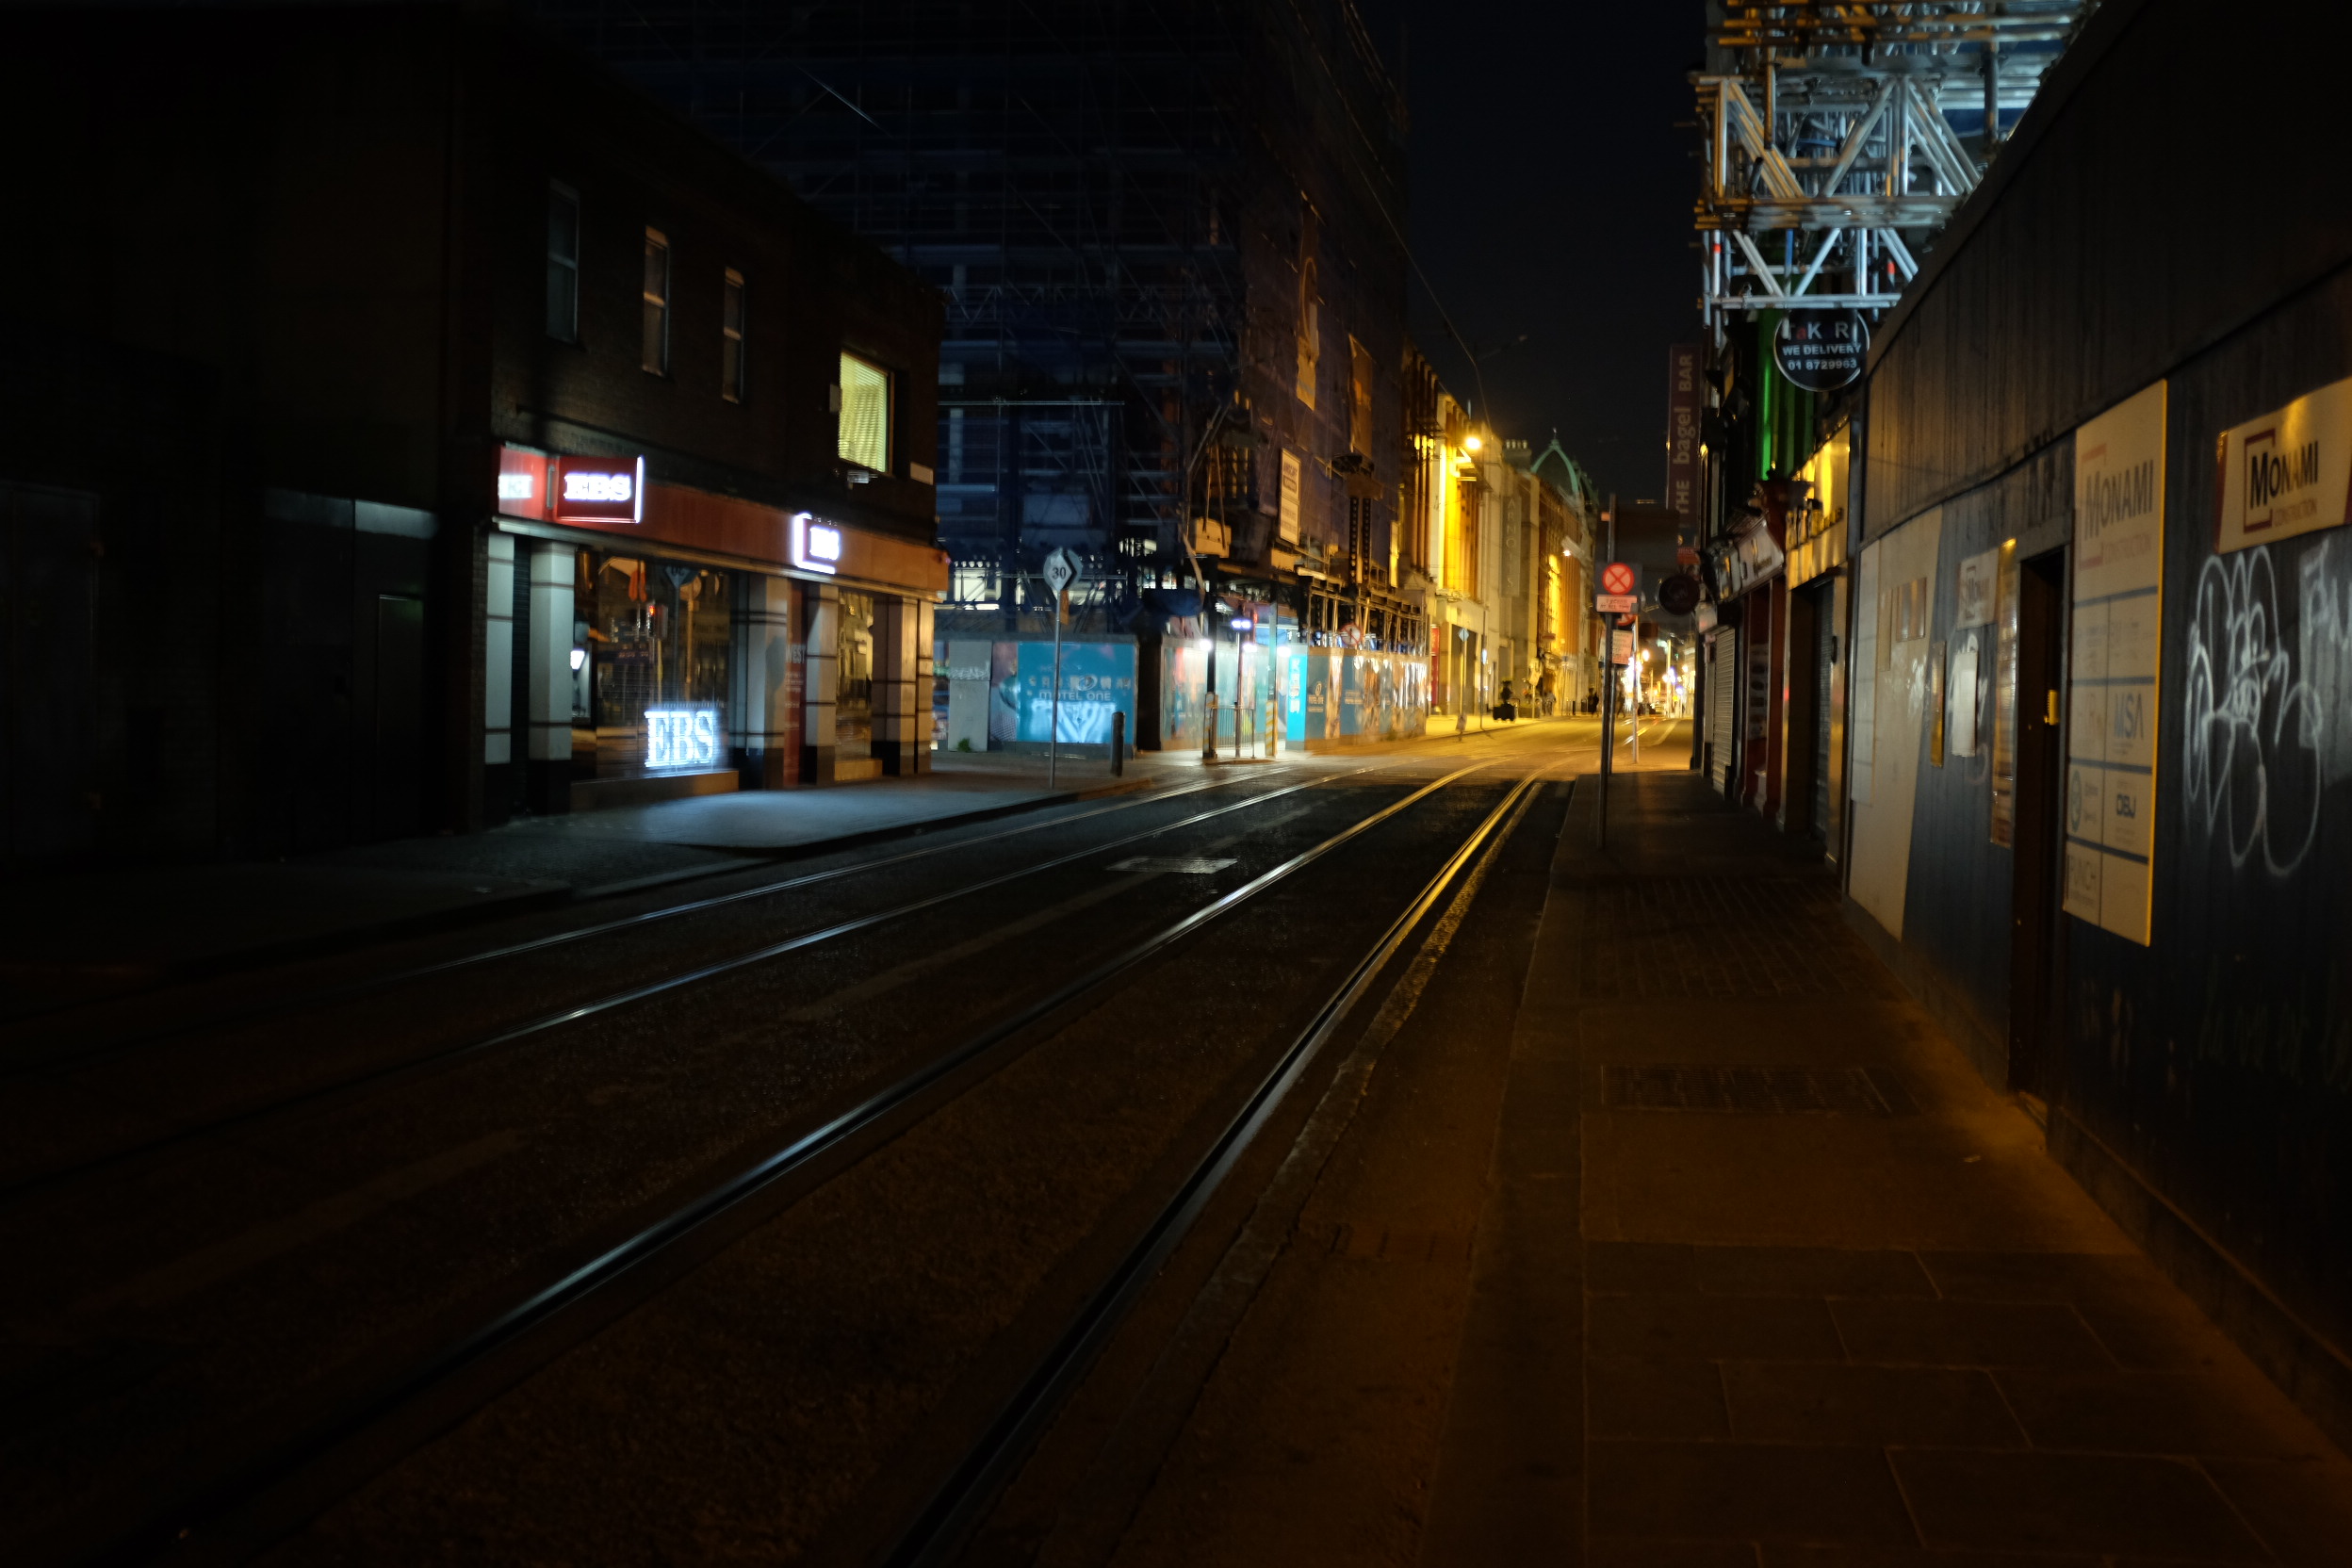 A photo of train rails in a city at night.